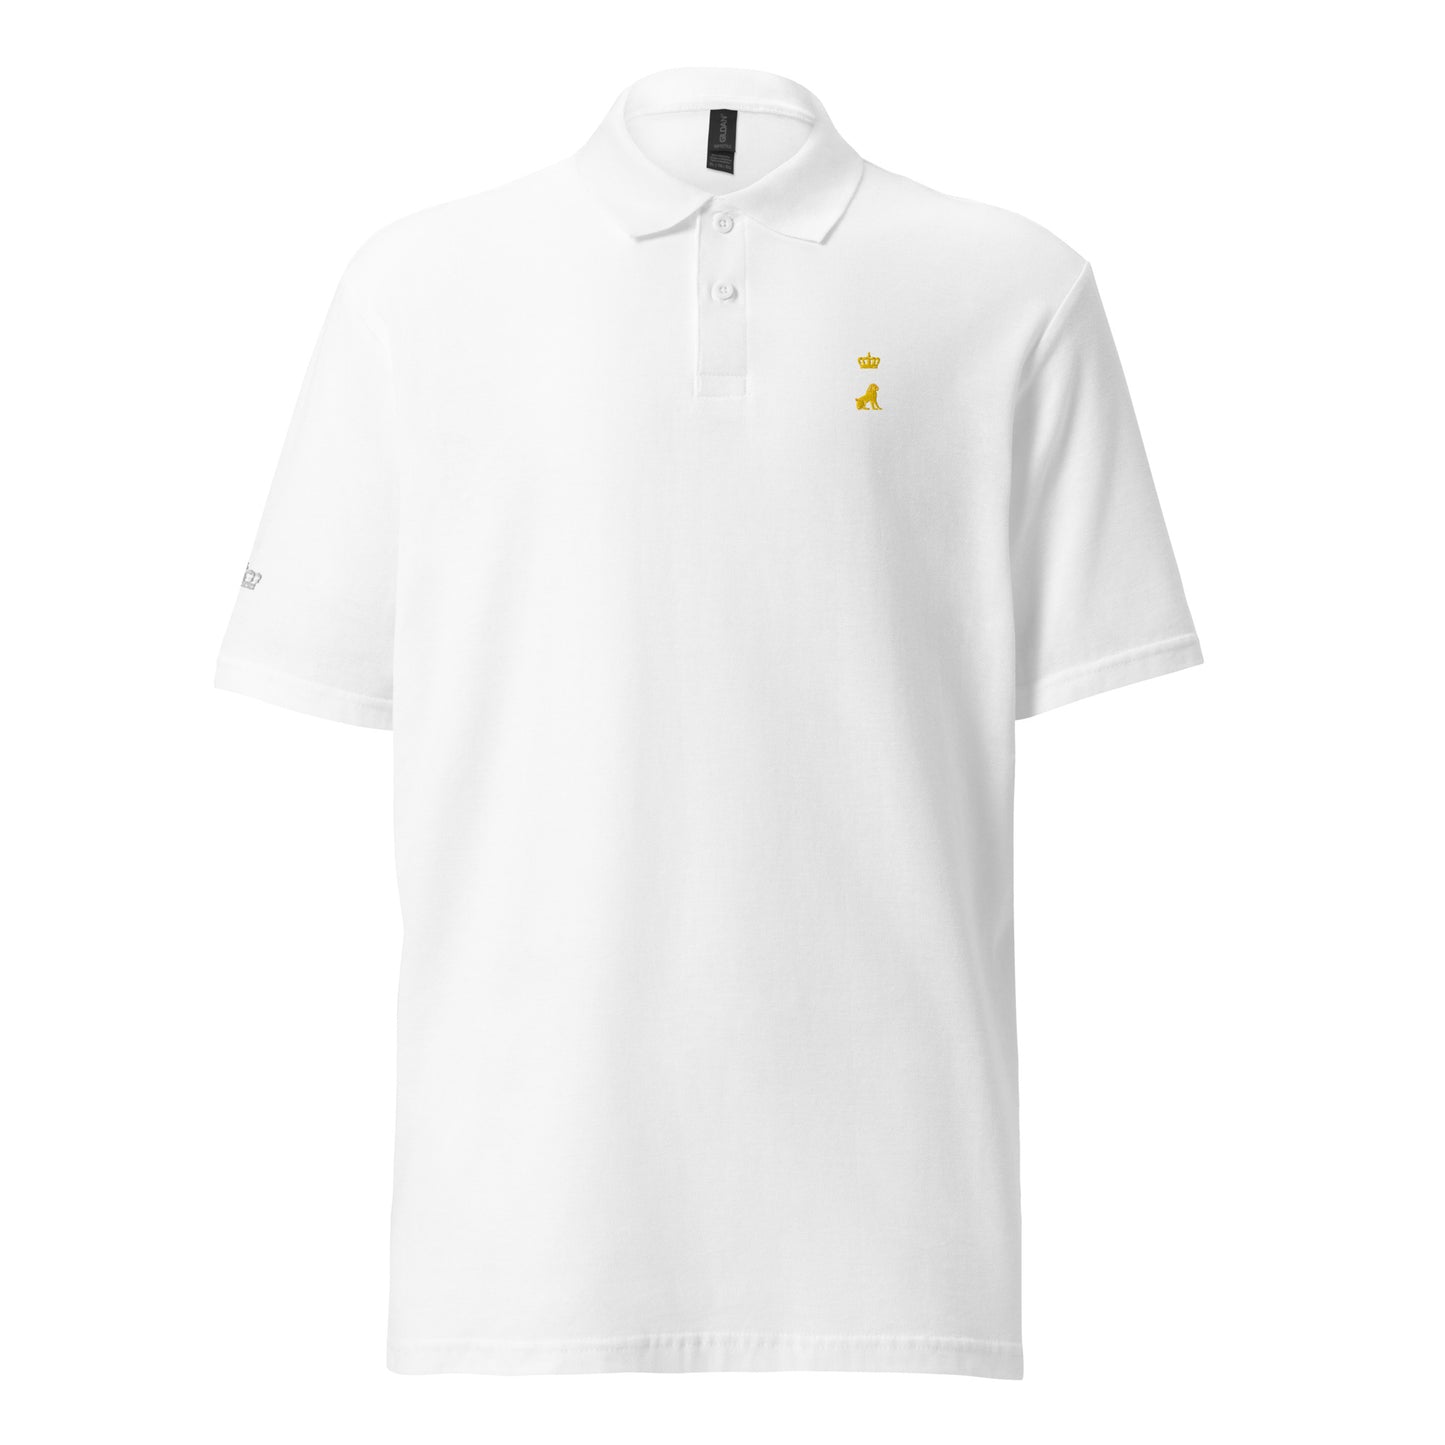 Queen Luise Edition pique polo shirt (unisex | embroidered)